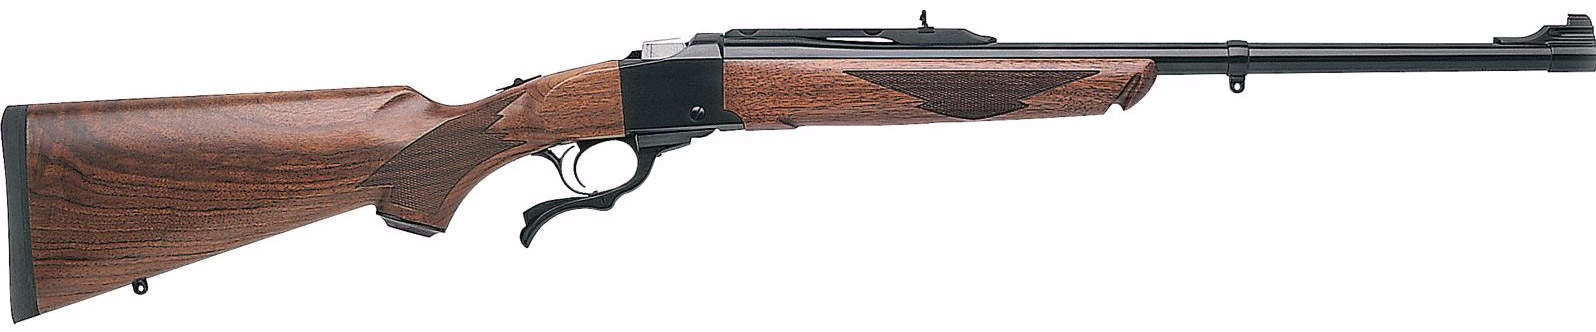 Ruger No. 1 Centerfire Rifle